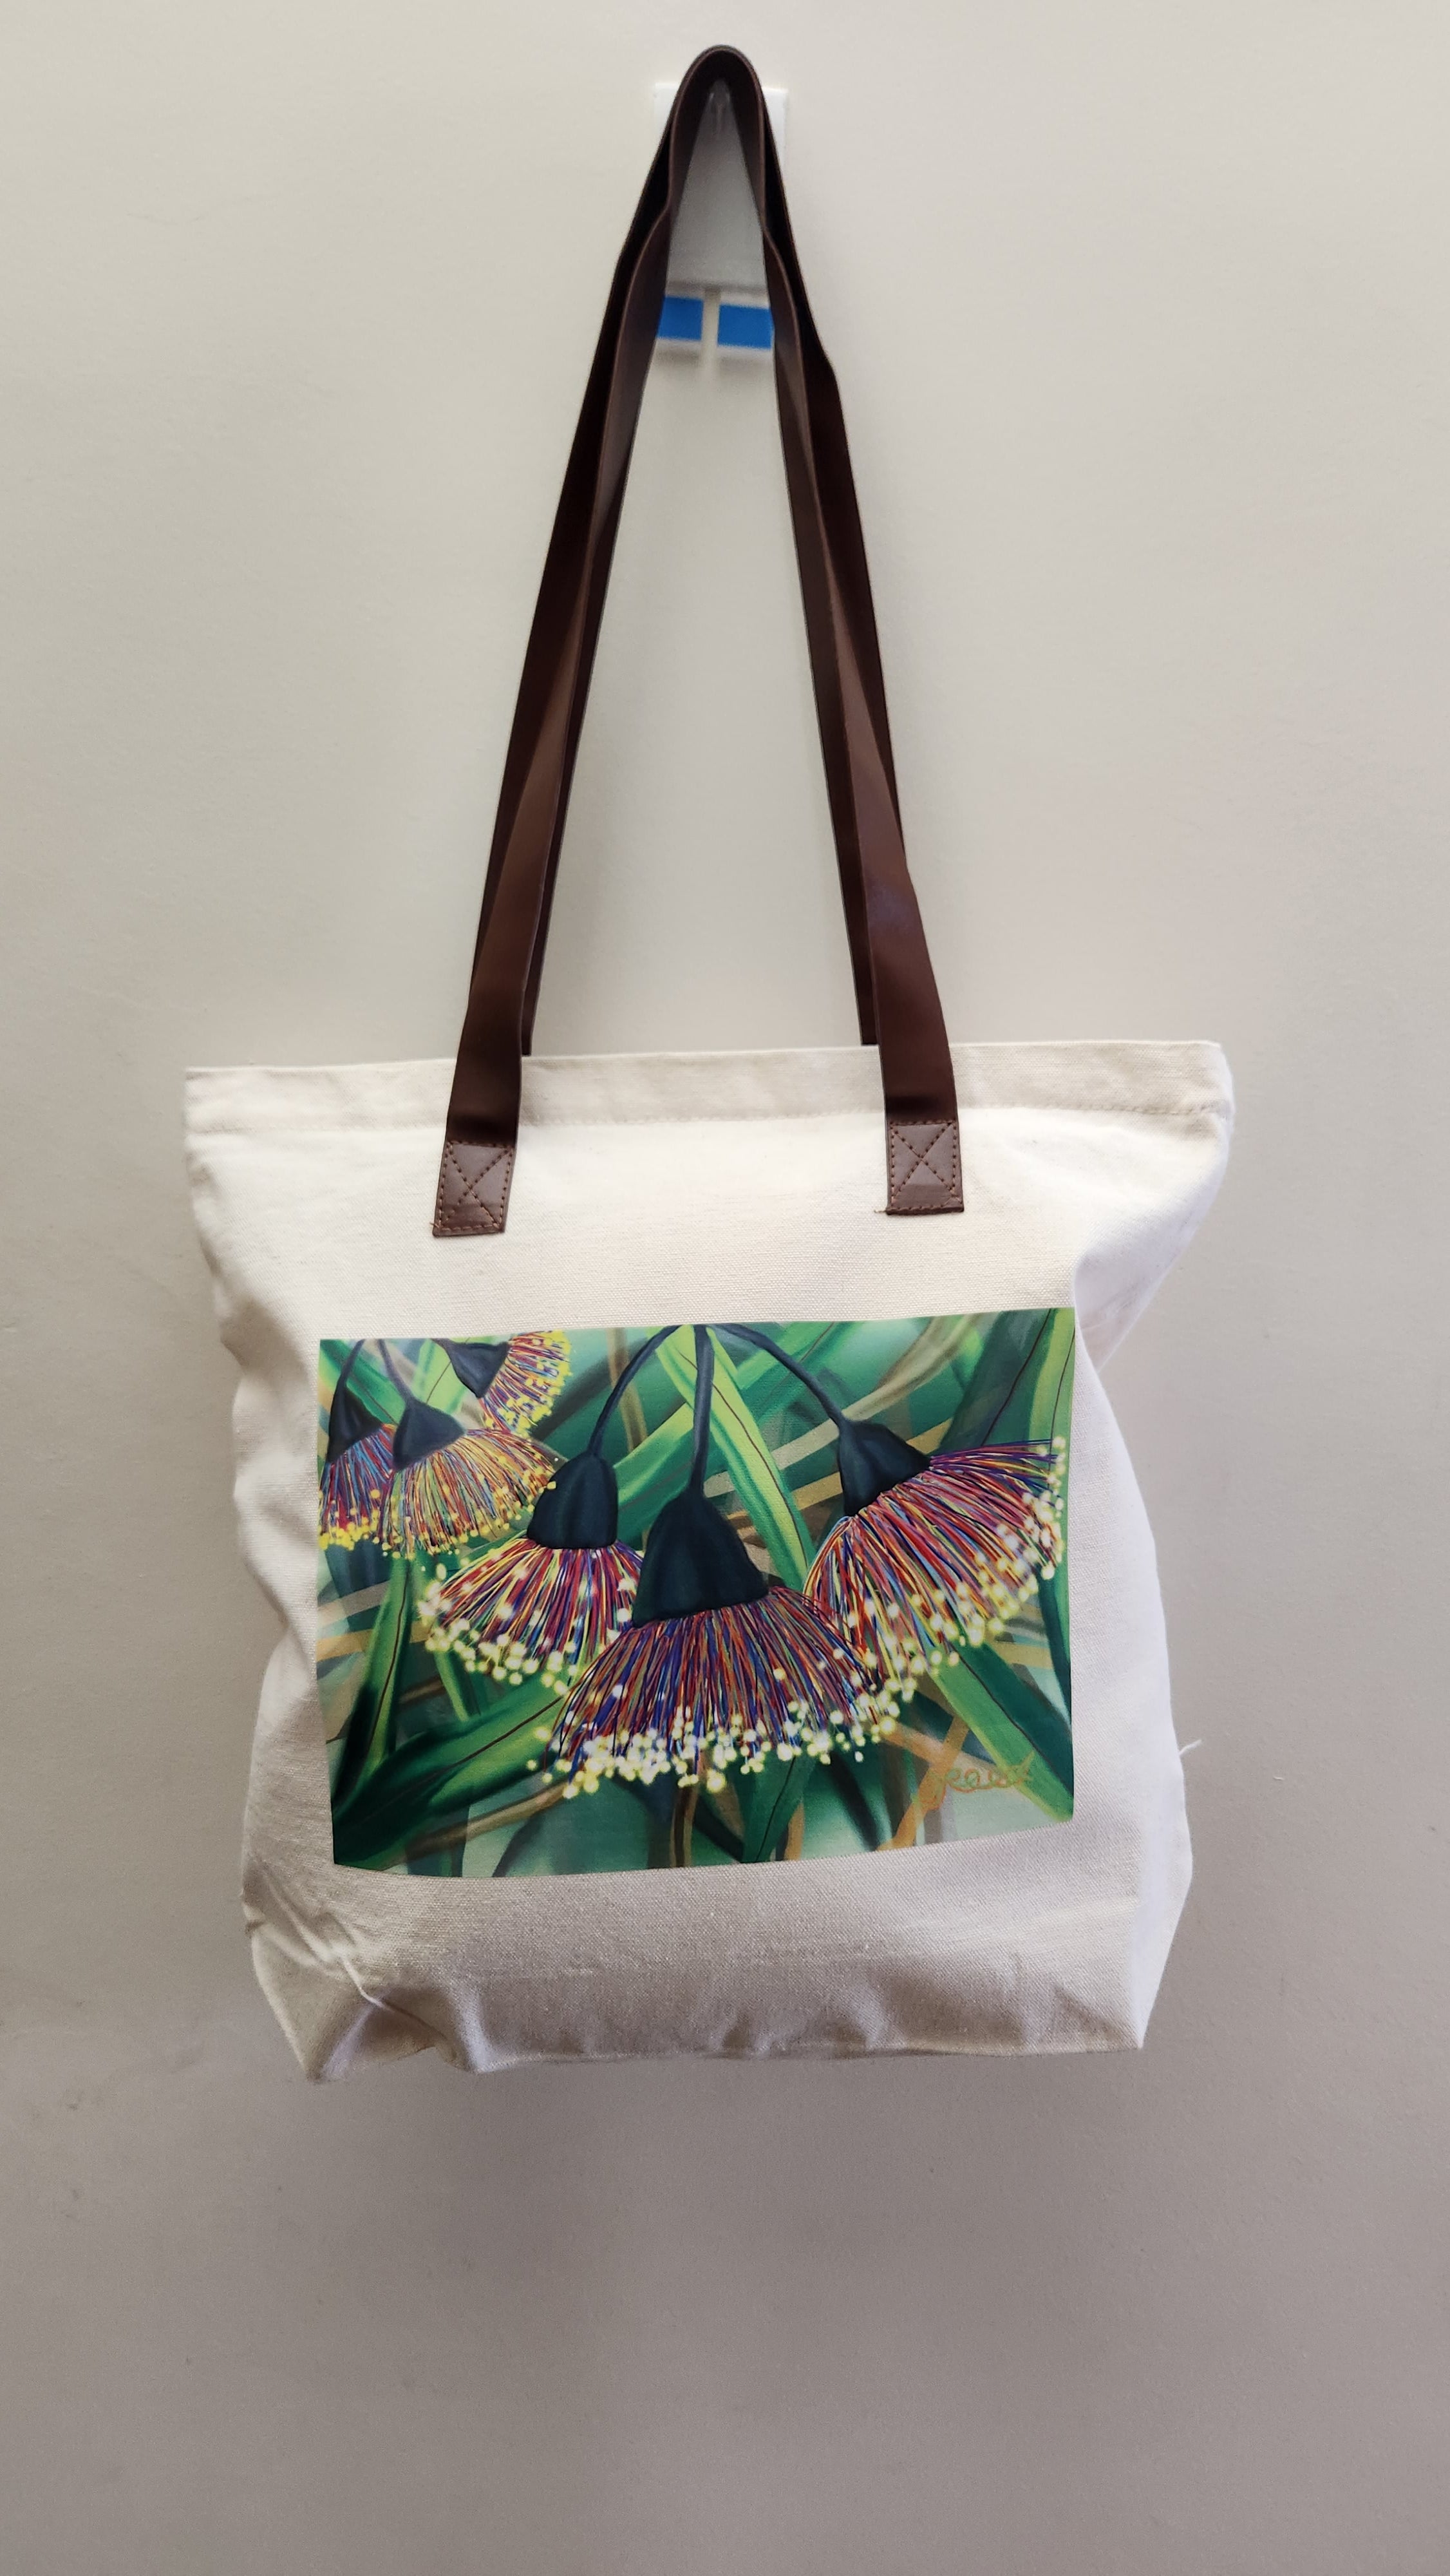 Boutique style tote bag- New gumtree